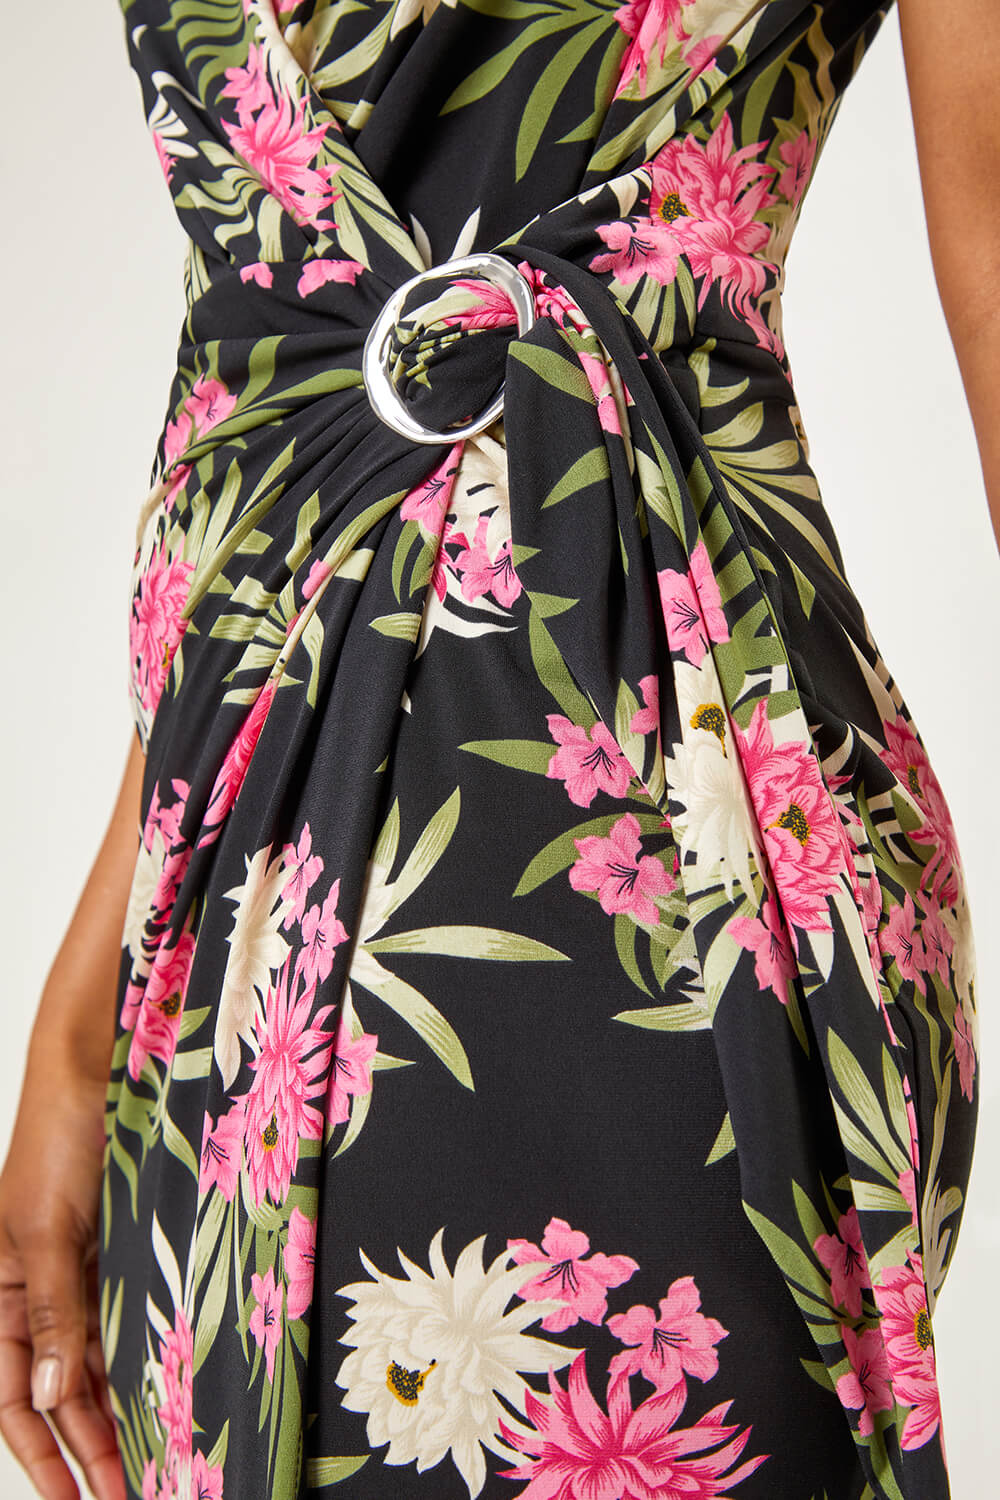 PINK Petite Floral Print Wrap Ruched Maxi Dress, Image 5 of 5